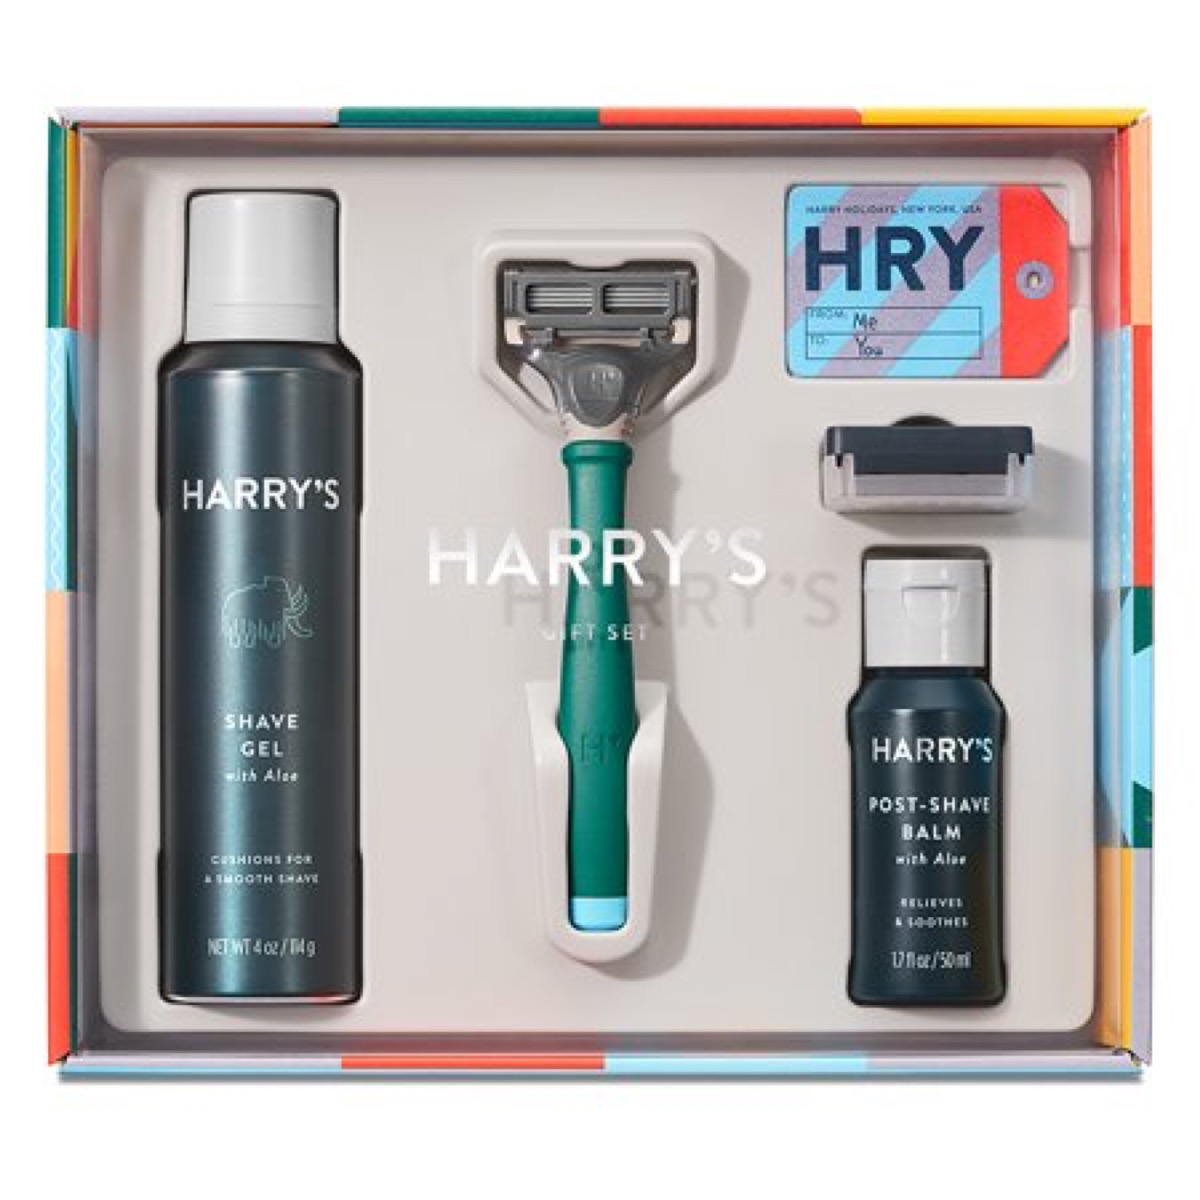 harry's holiday shave kit